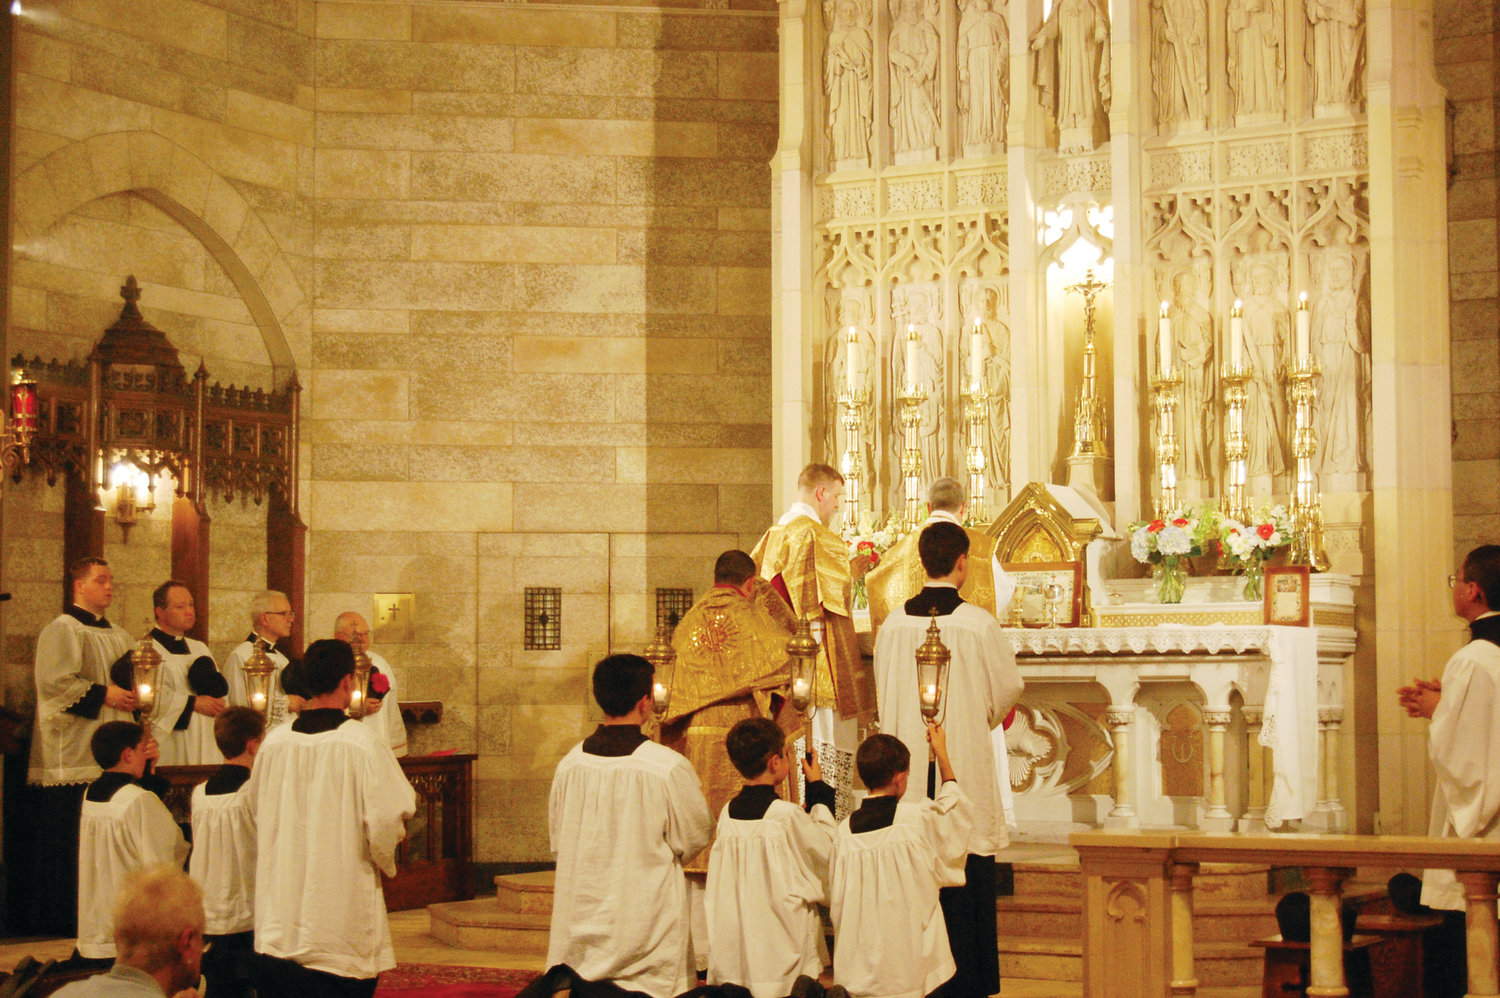 The congregation fills the beautiful Church of St. Mary’s on Broadway to recognize the 150th anniversary of the parish, as Father John Berg, FSSP, joins his brother priests in celebrating Mass on the occasion.